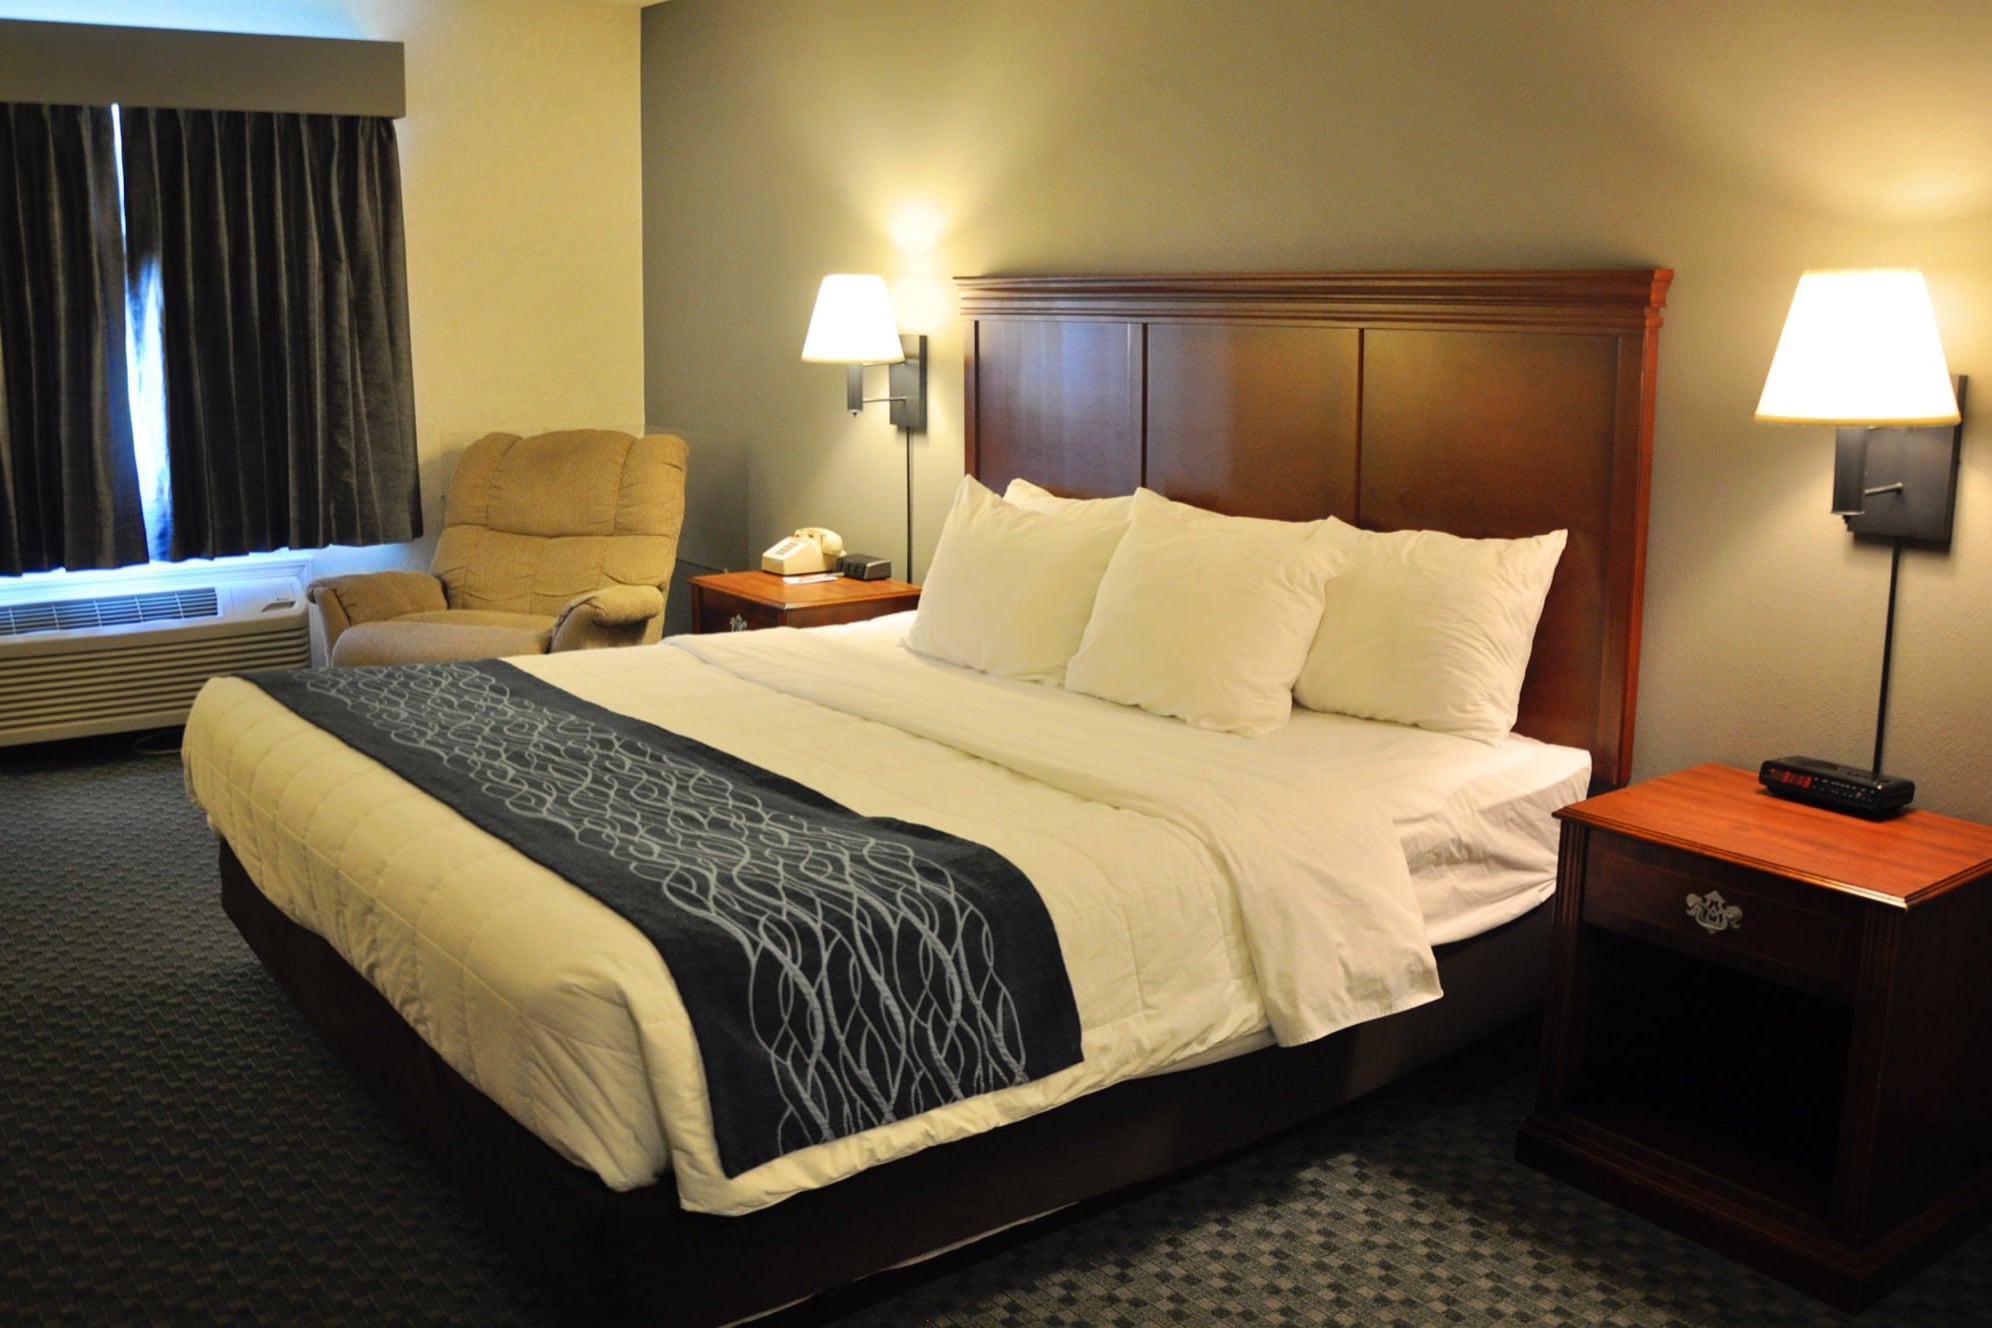 Our rooms with 1 king bed has all the amenities listed above with the addition of a comfy recliner.